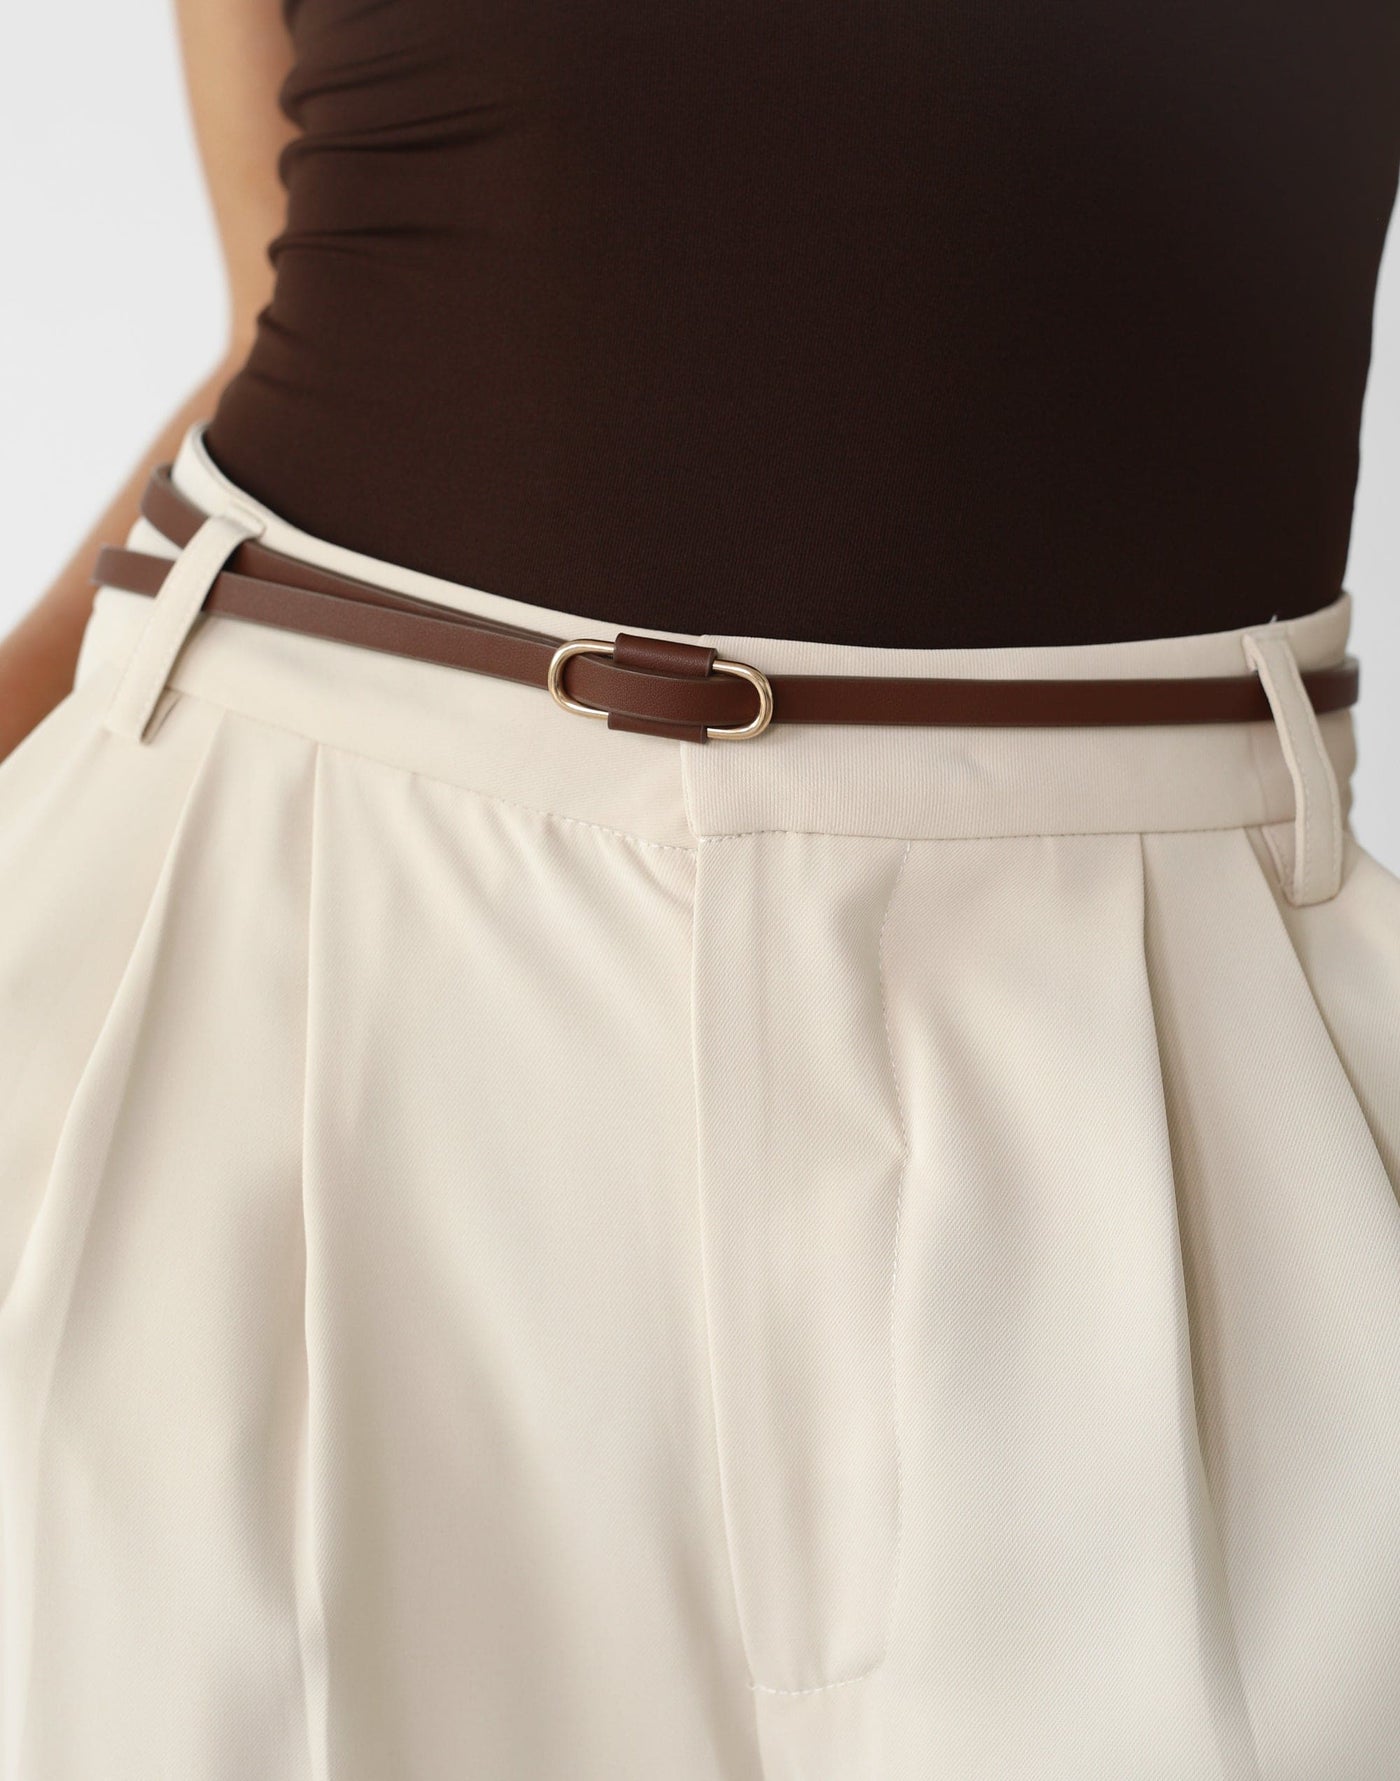 Blair Belt (Cocoa) - Thin Brown Faux Leather Belt - Women's Accessories - Charcoal Clothing